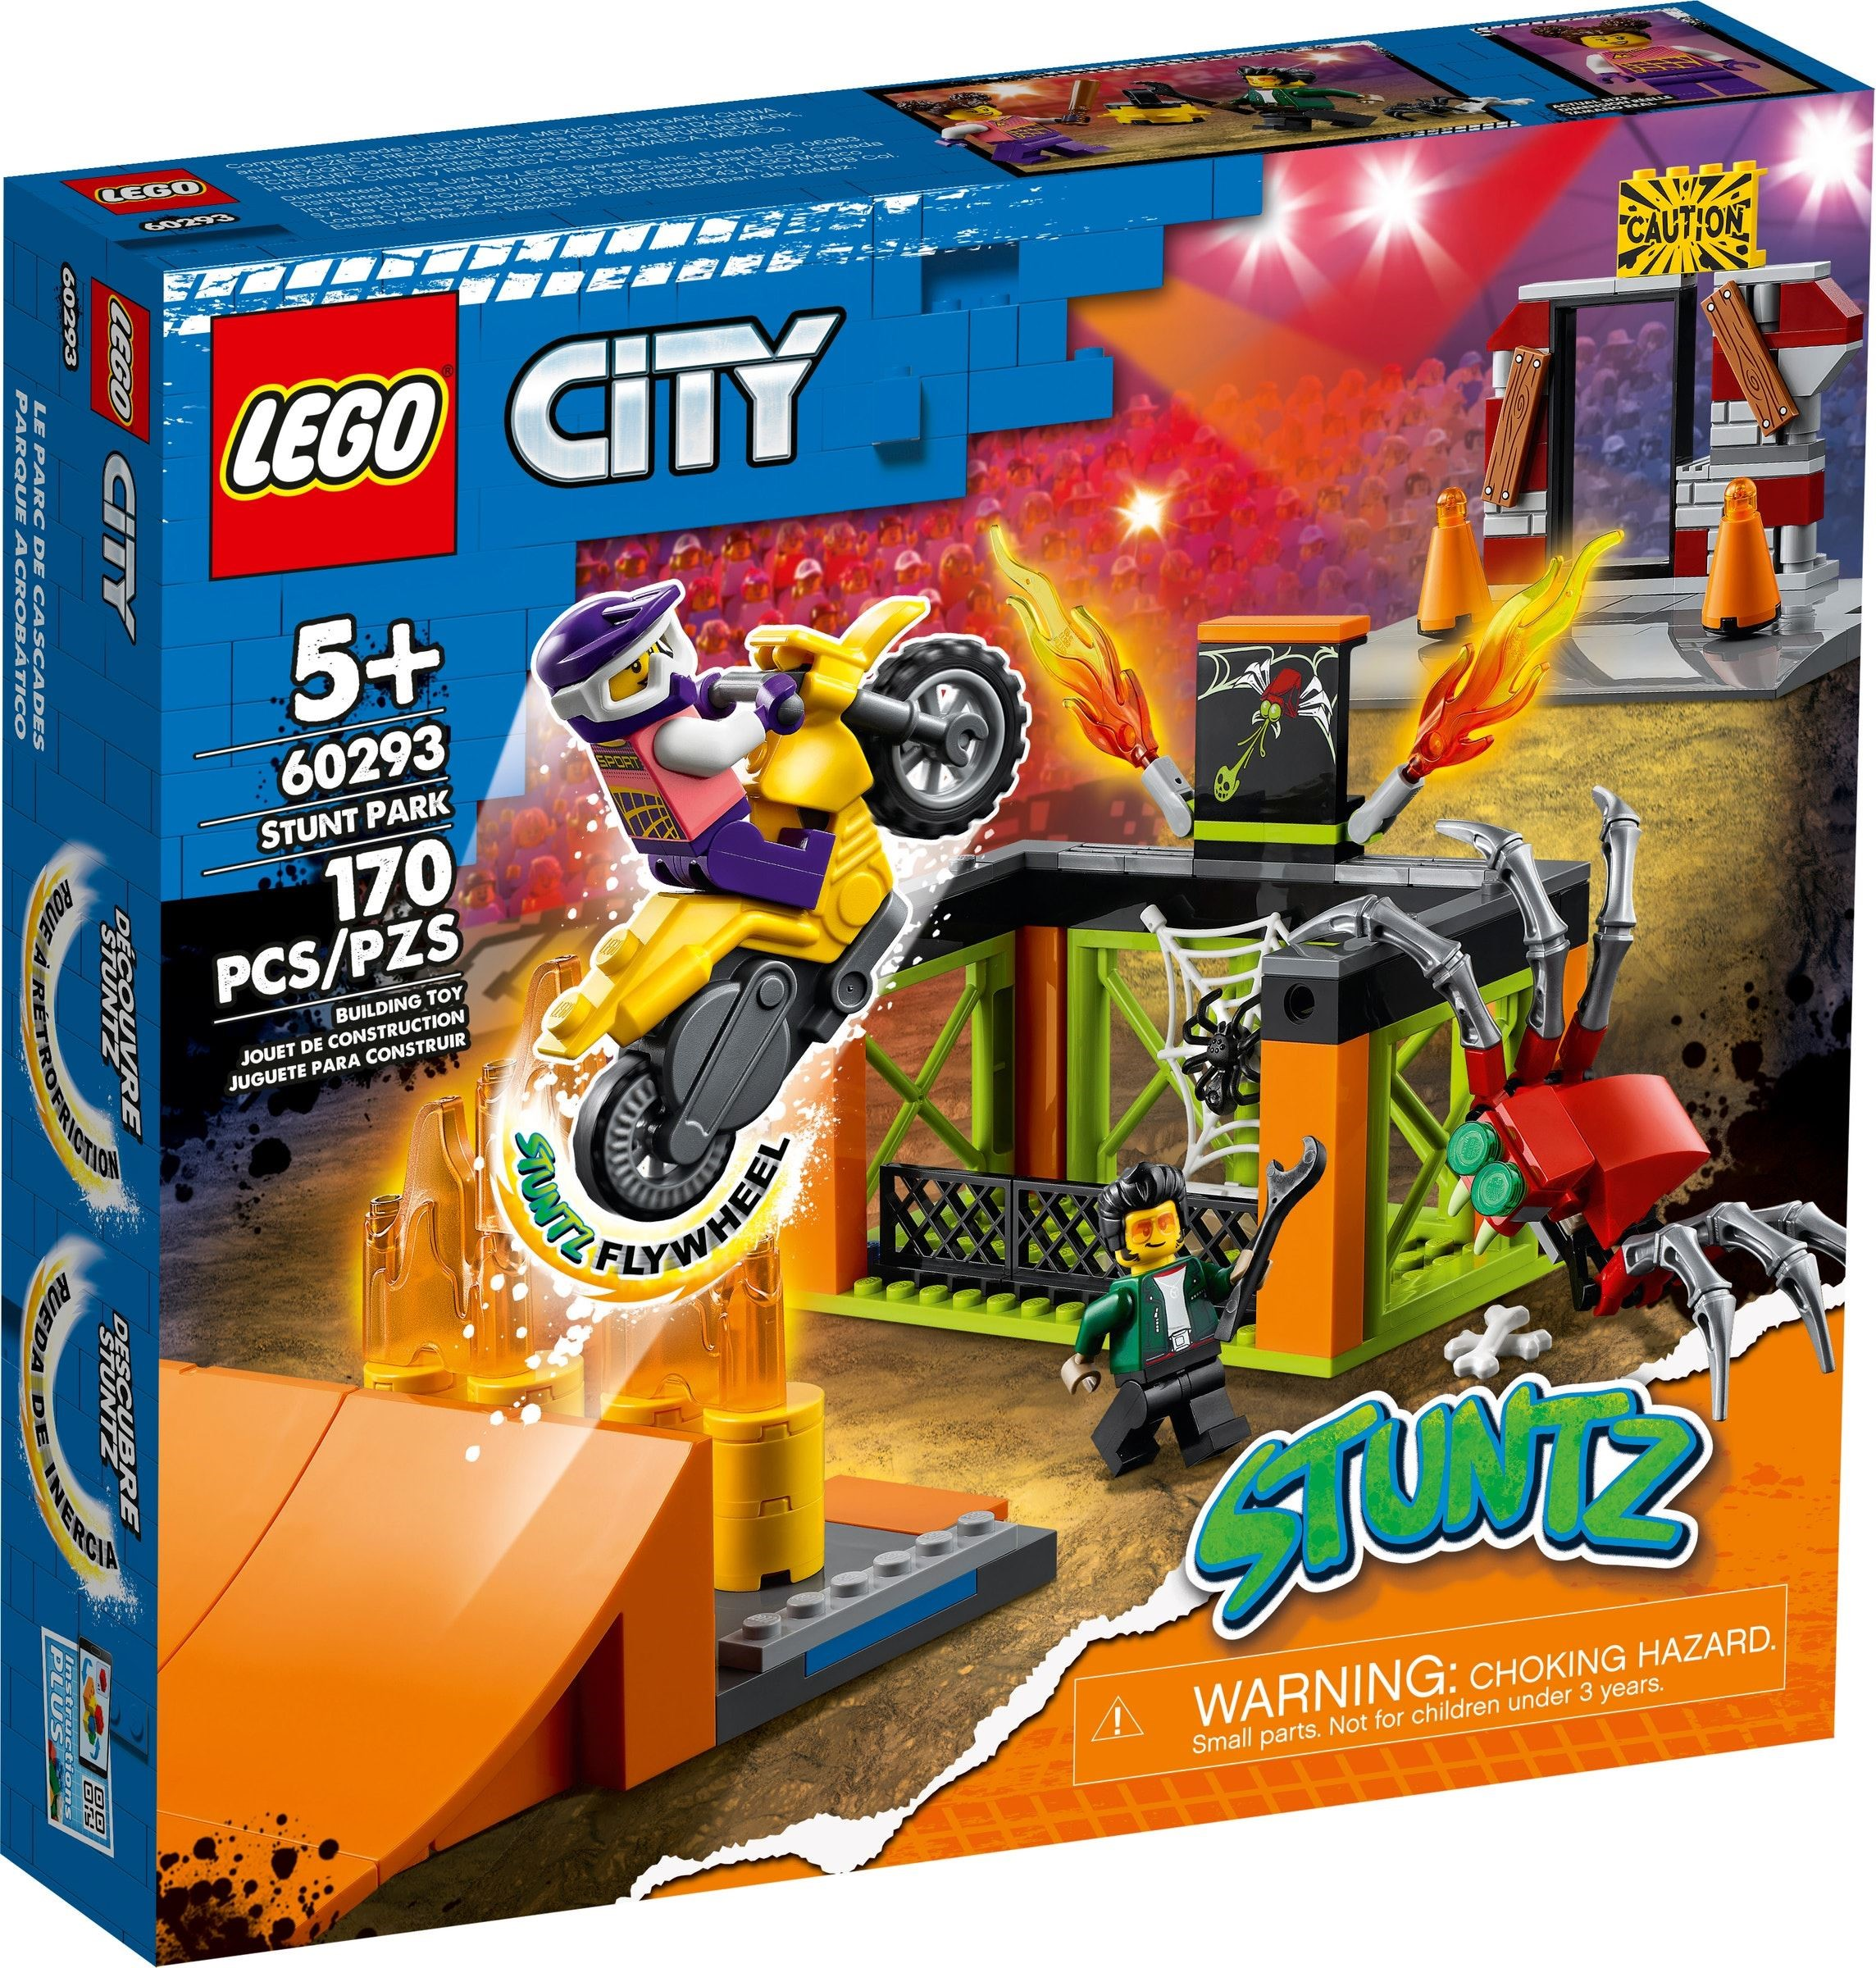 LEGO City Chicken Stunt Bike 60310 Building Kit; Fun Cool Toy for Kids (10  Pieces)